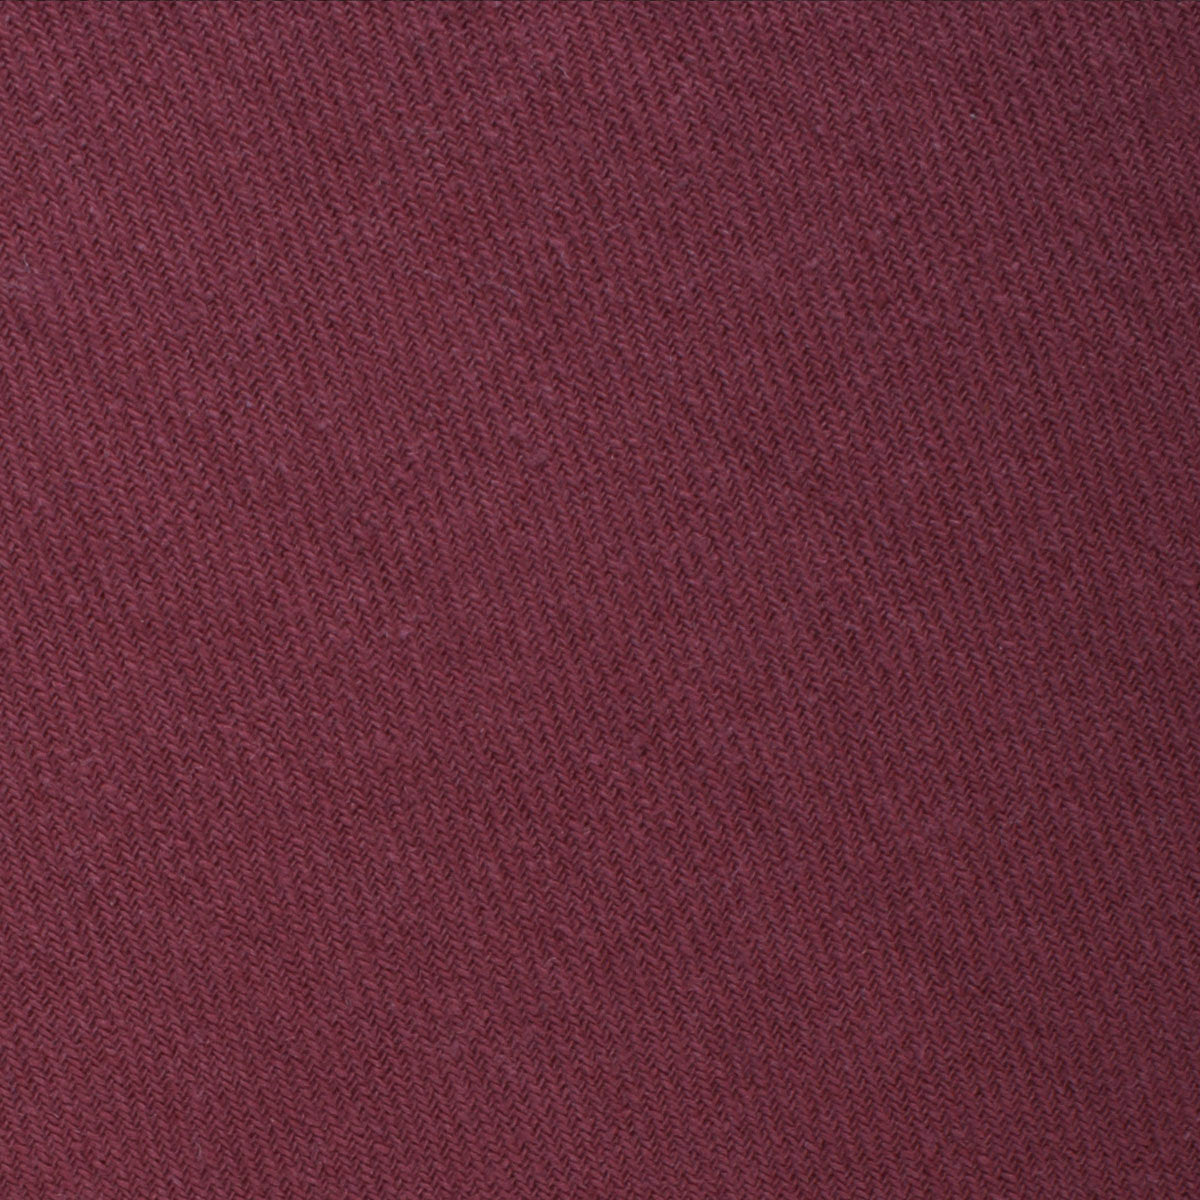 Mulberry Linen Self Bow Tie Fabric